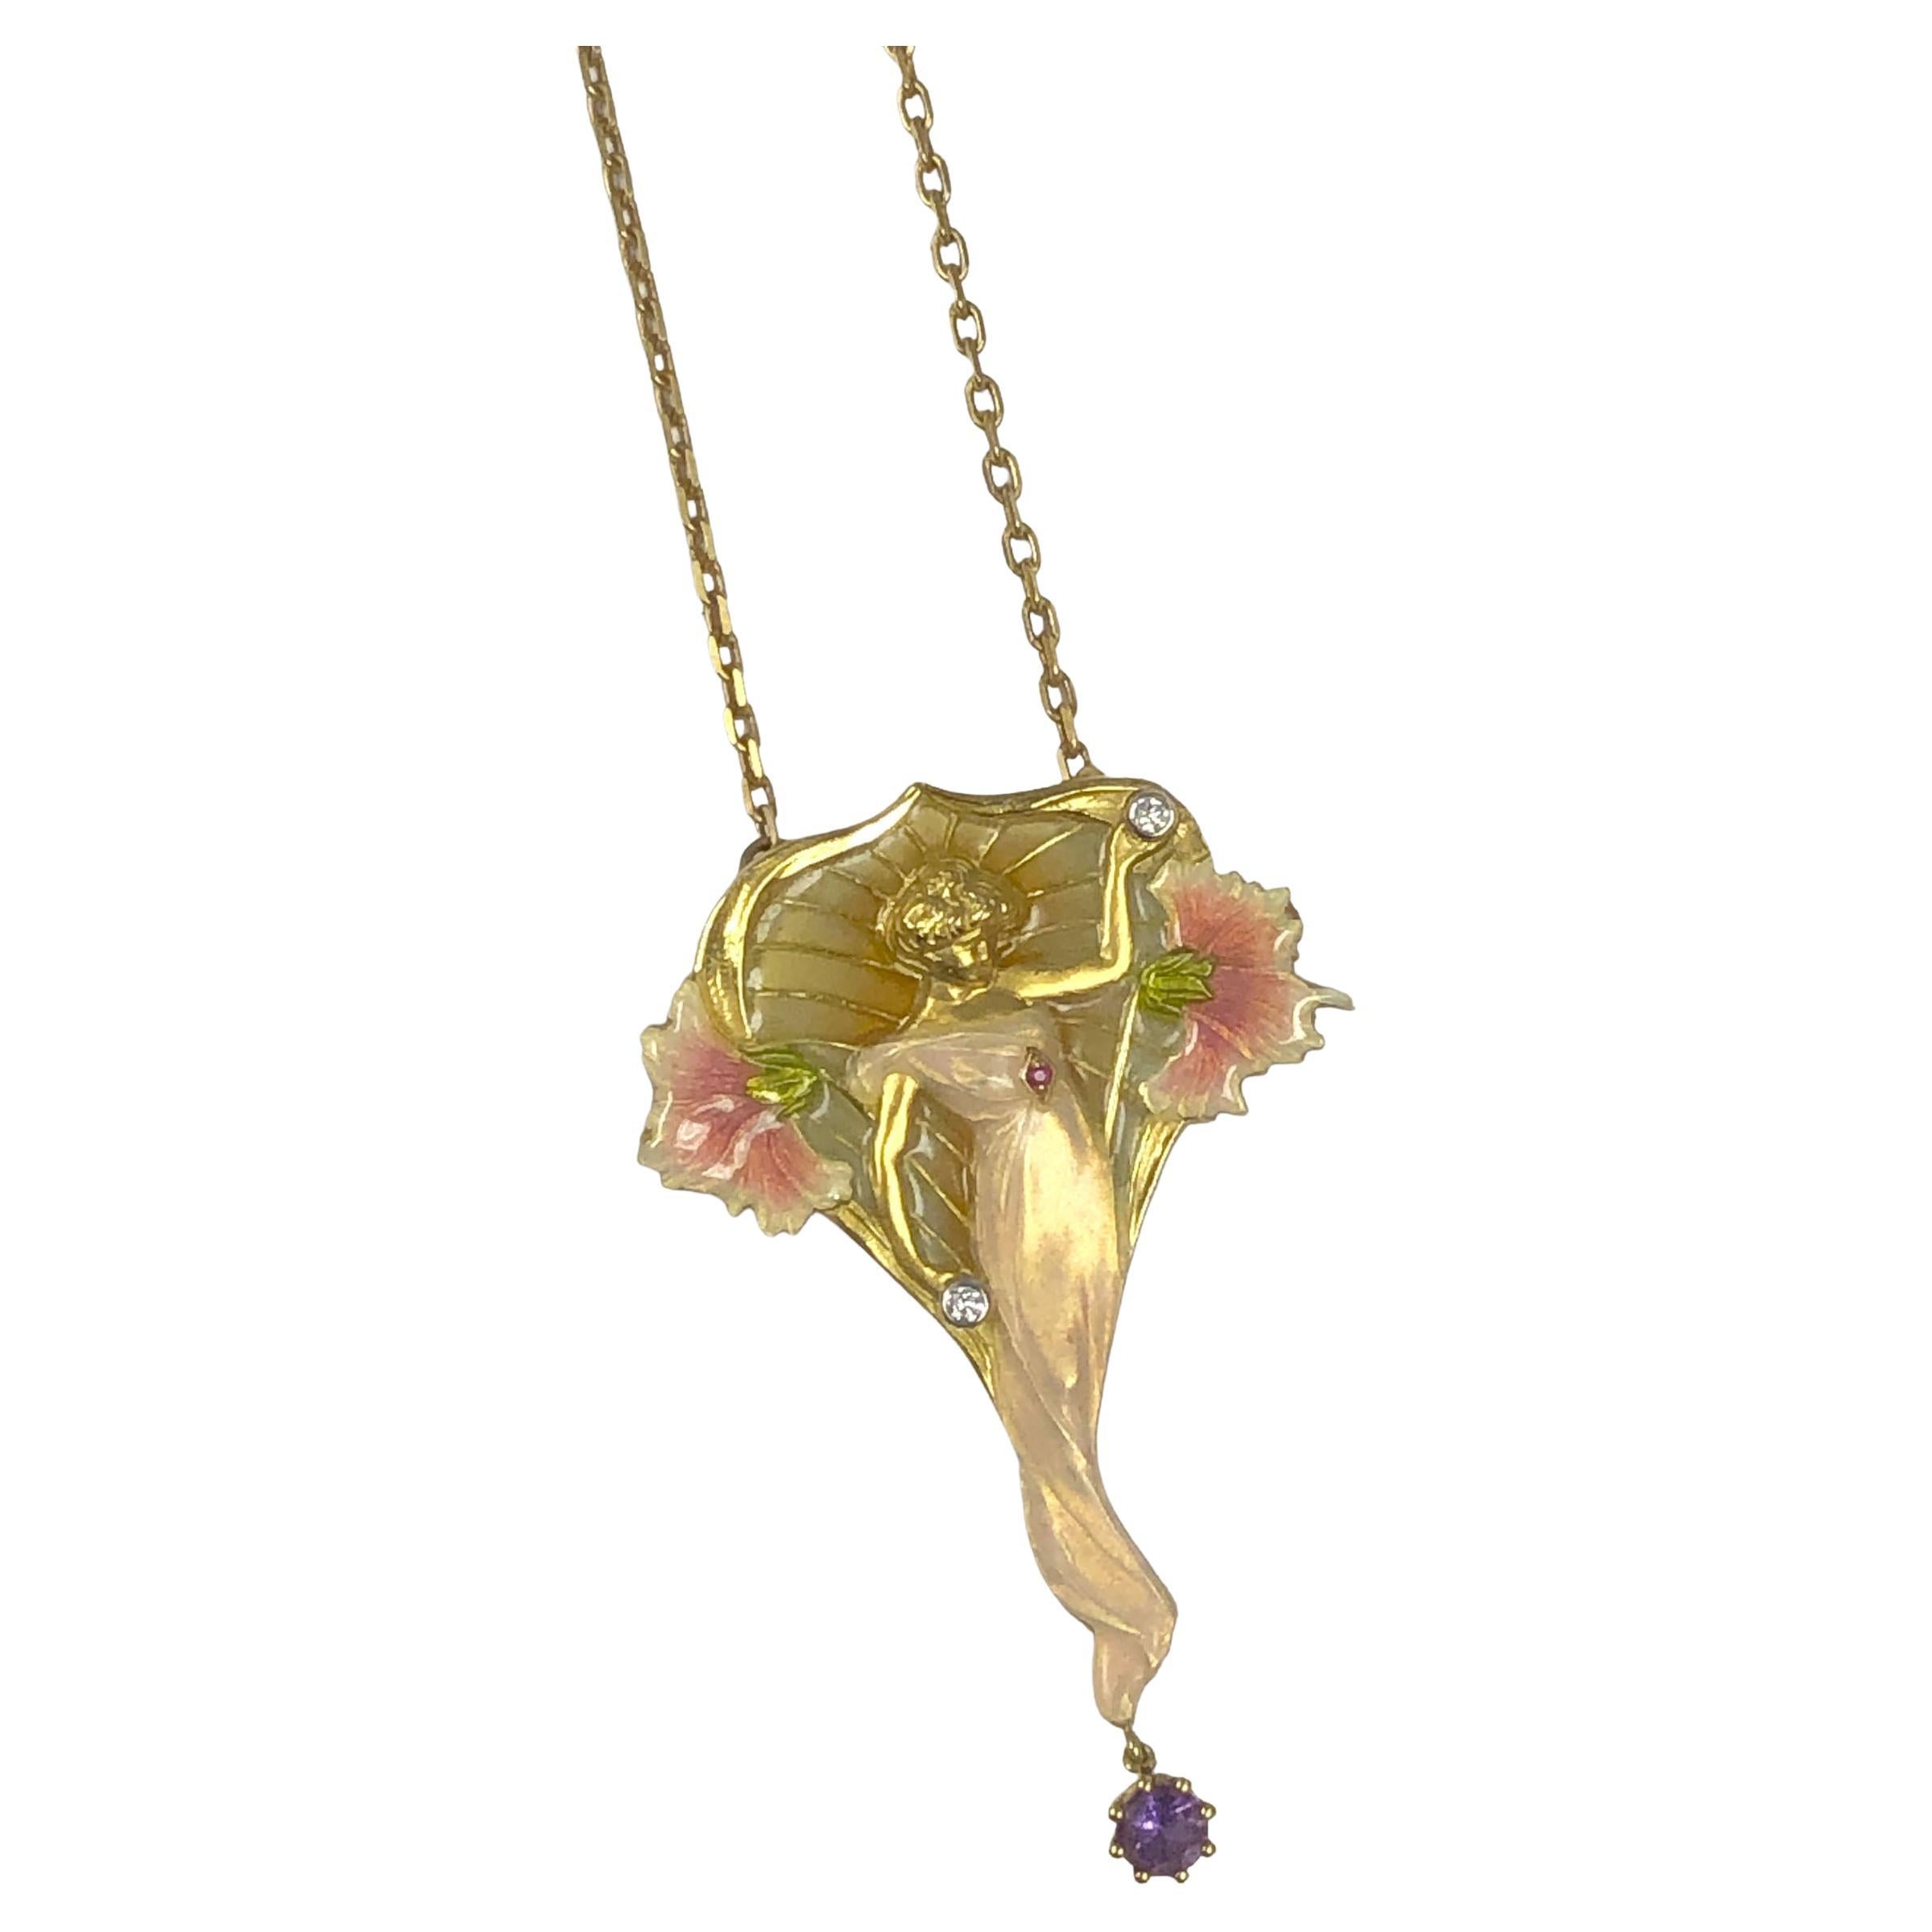 Circa 1980 - 1990 Masriera of Spain 18k Yellow Gold Pendant Brooch in the extreme Art Nouveau style as Masriera has been producing for over 120 Years. Measuring 2 1/4 inches in length X 1 1/2 inches and suspended from an 18 inch removable chain.